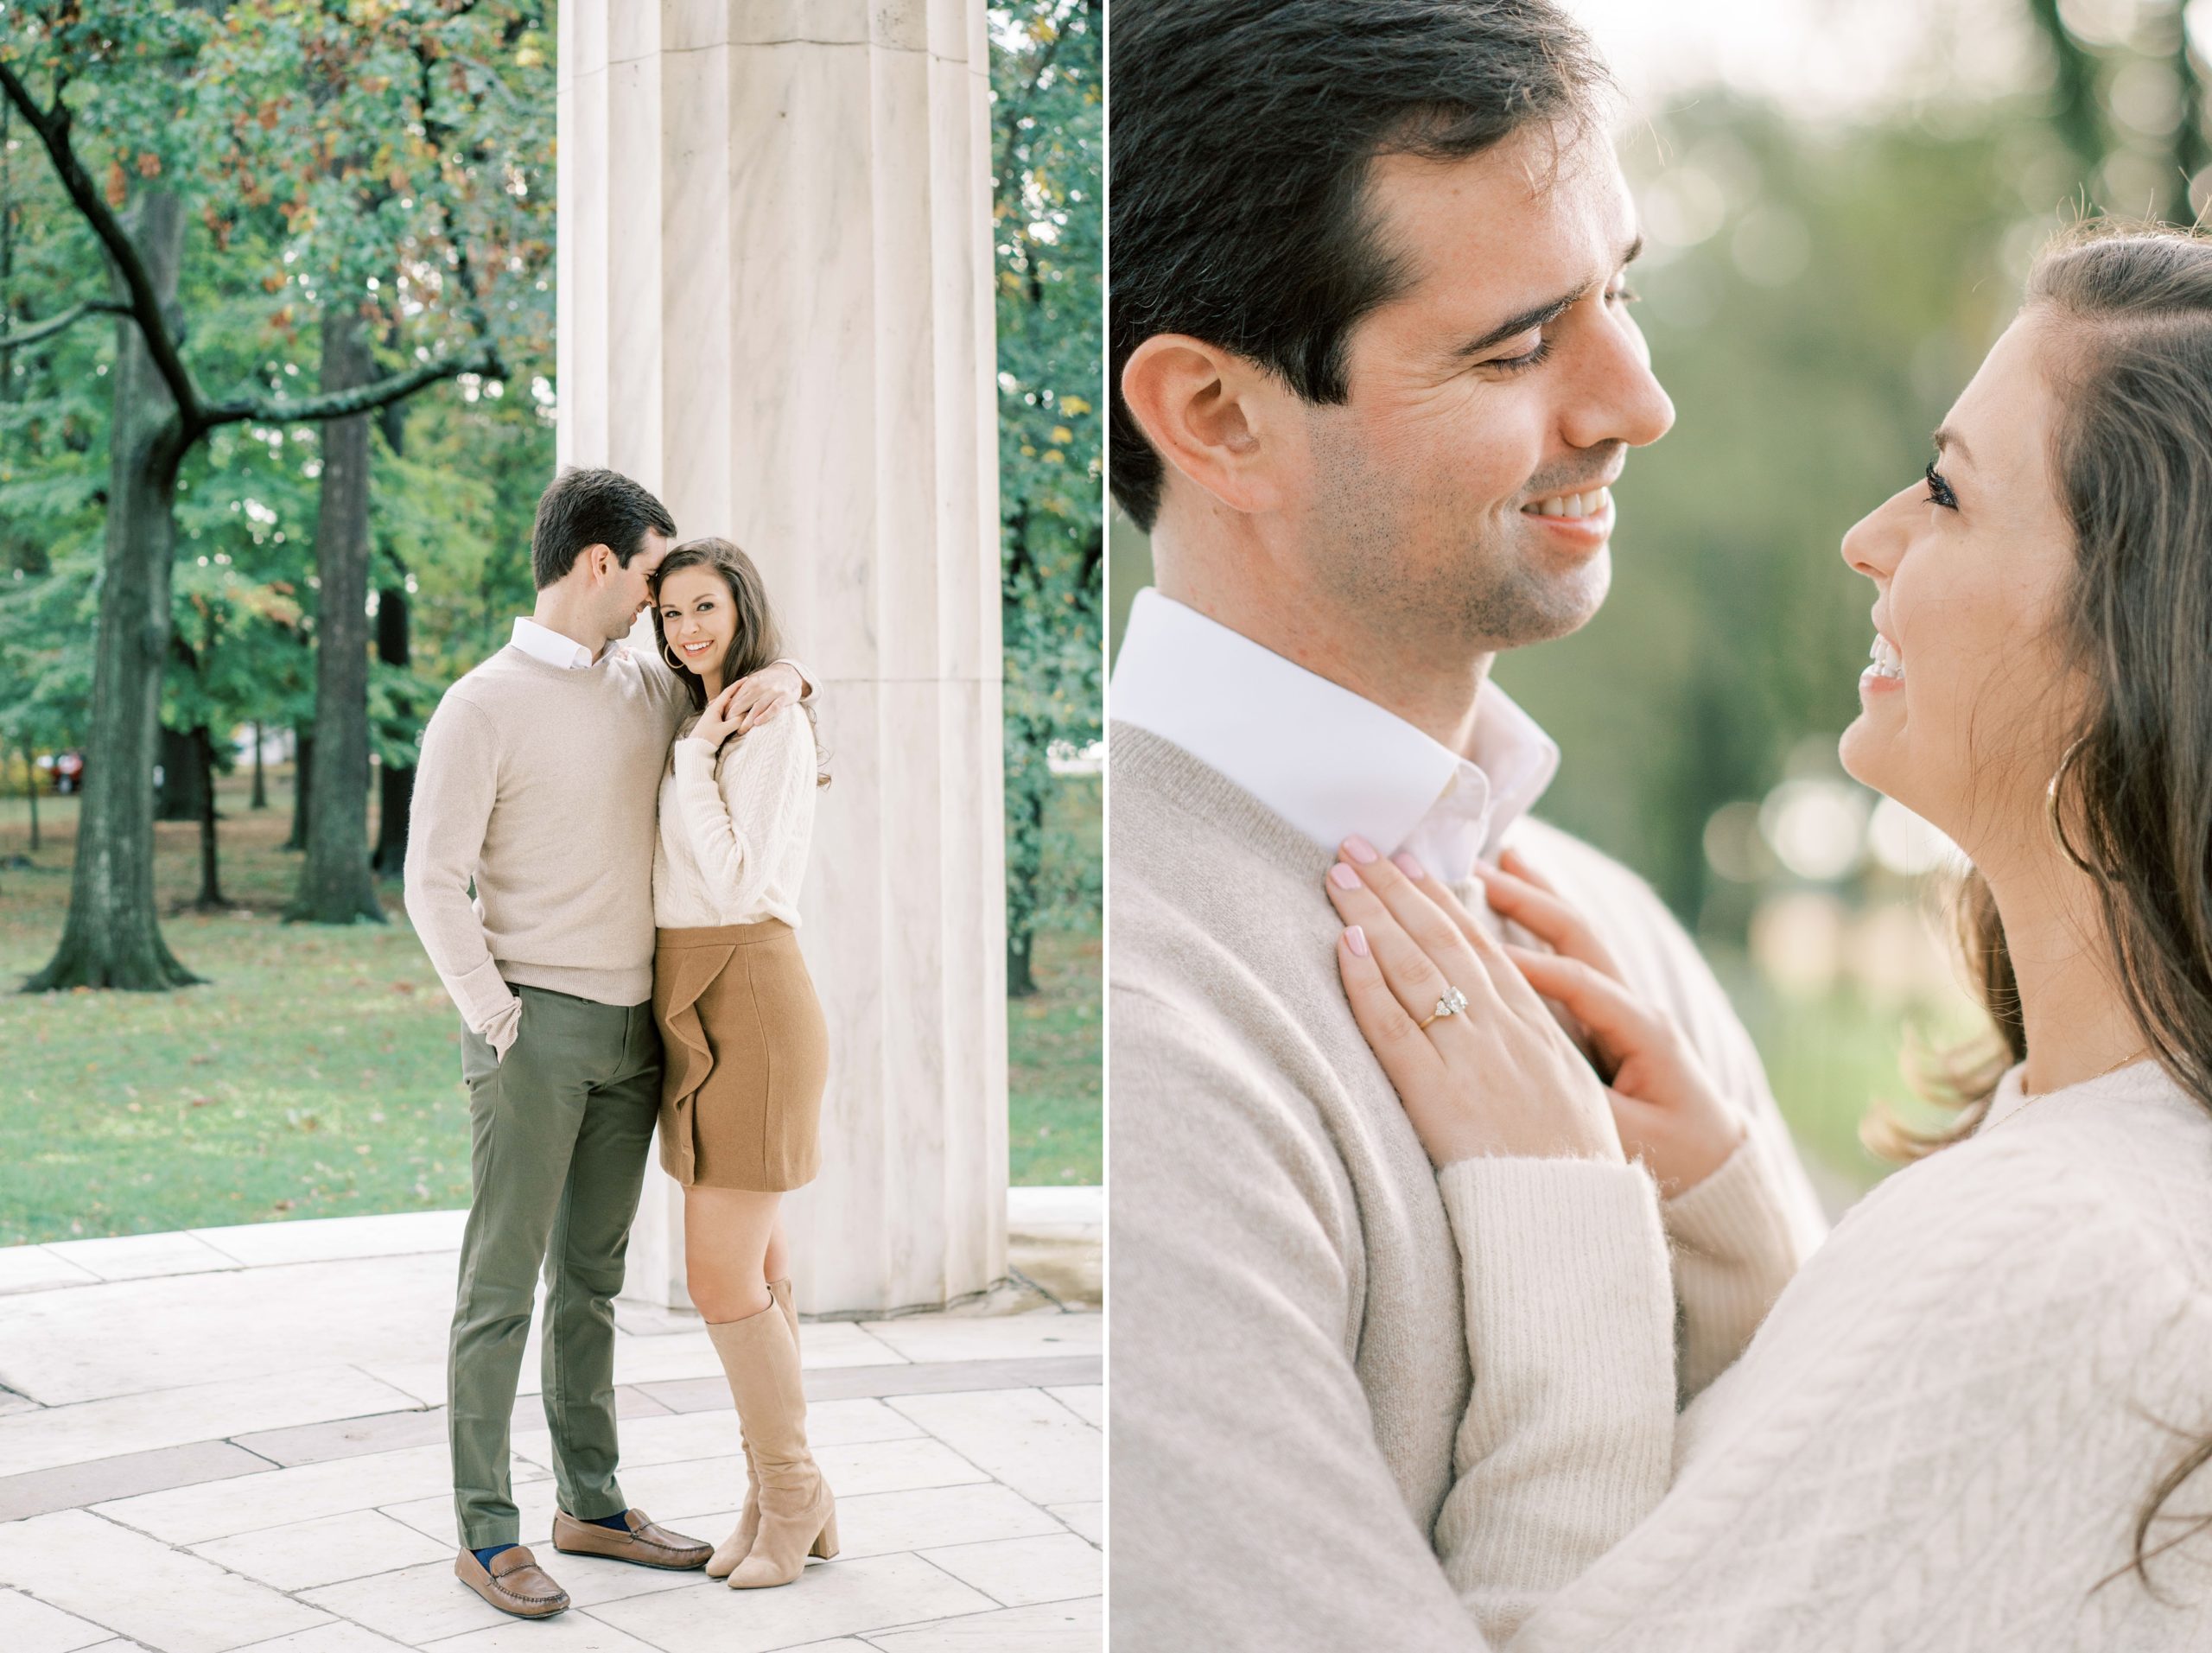 A fall engagement session at the Lincoln Memorial and Reflecting Pool photographed by Washington, DC wedding photographer, Alicia Lacey.